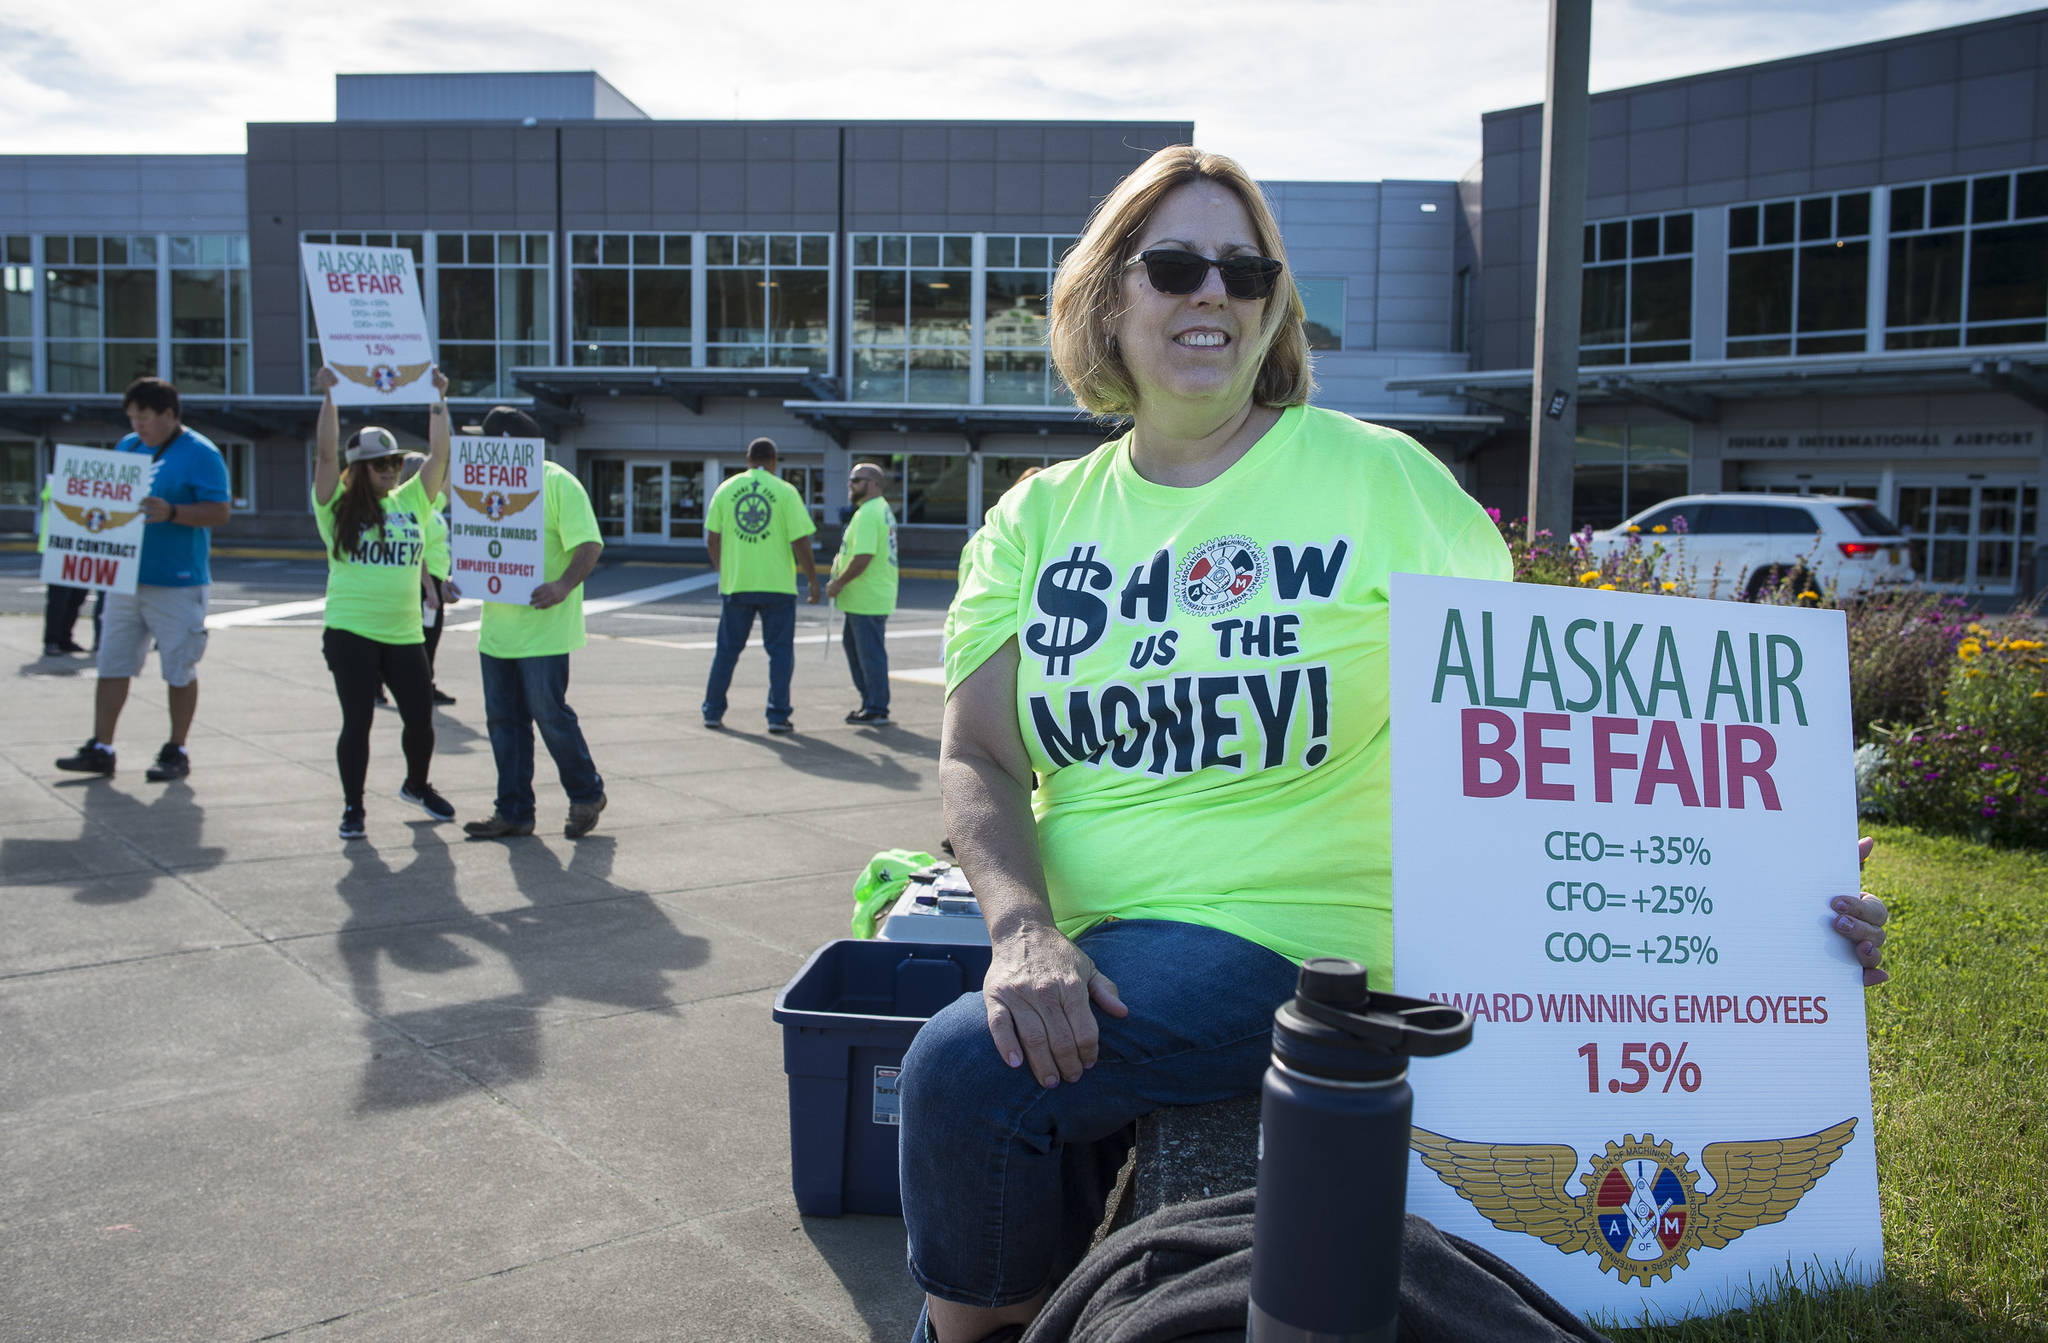 Employees ask Alaska Airlines for better wages, job security